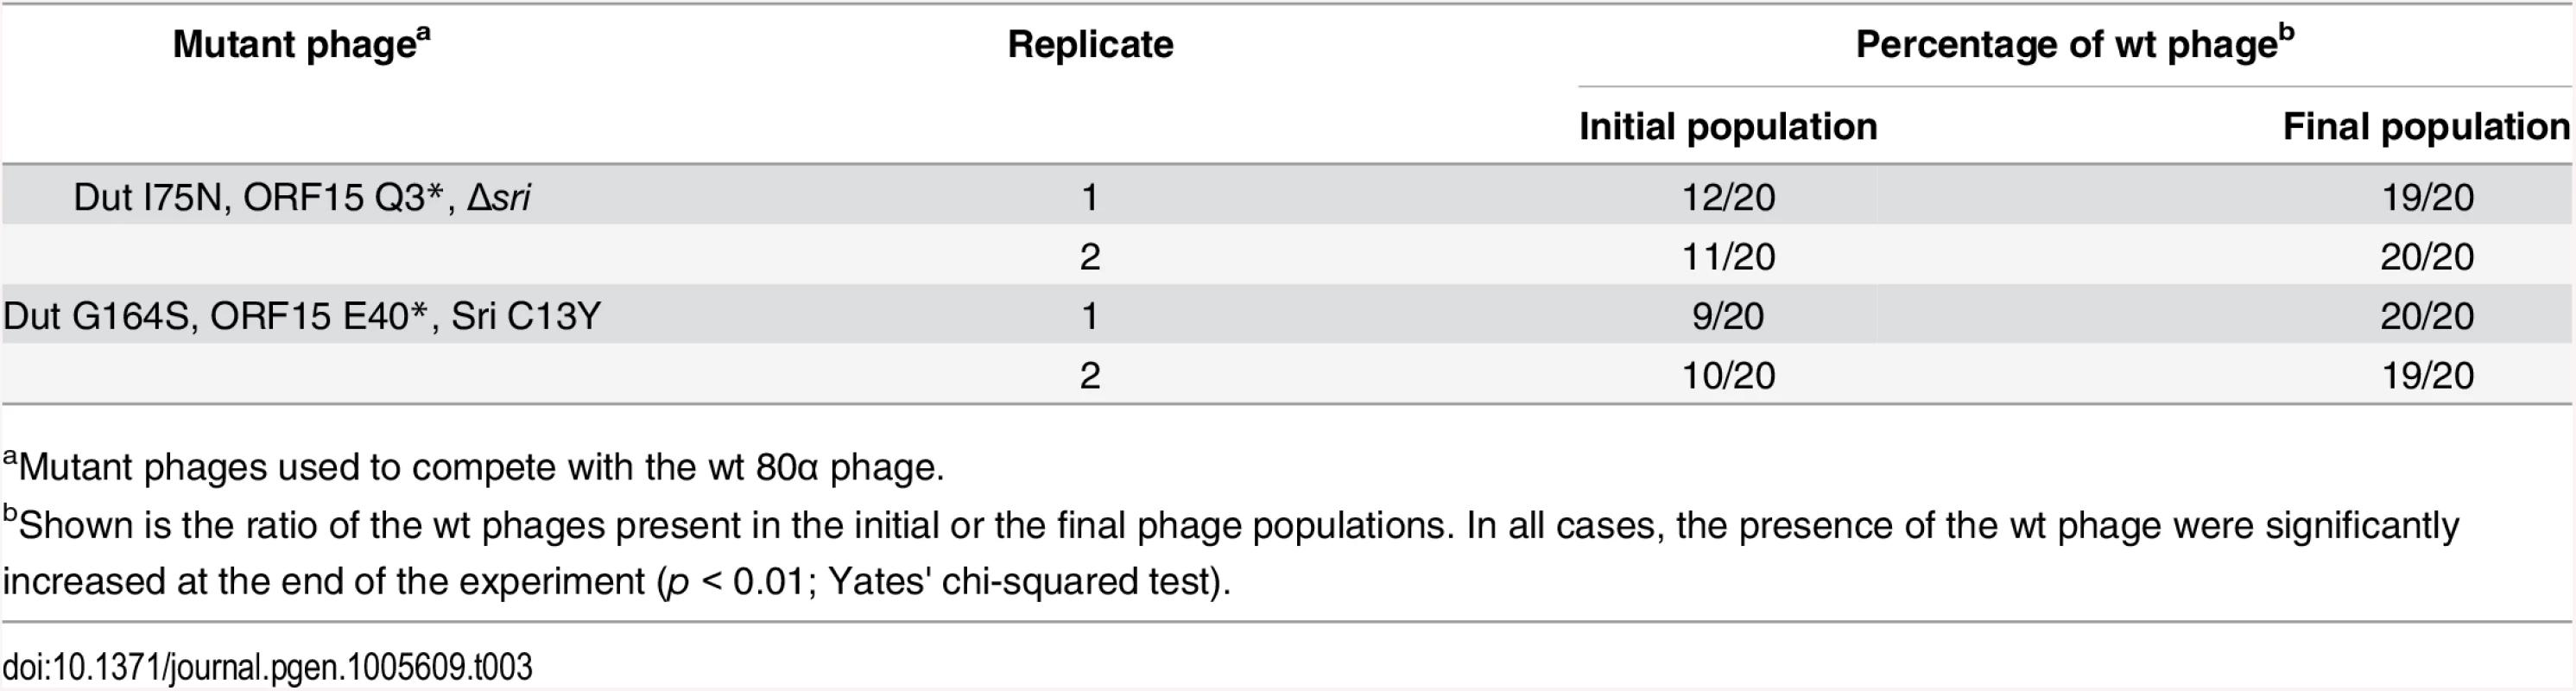 Fitness cost of the evolved phages.